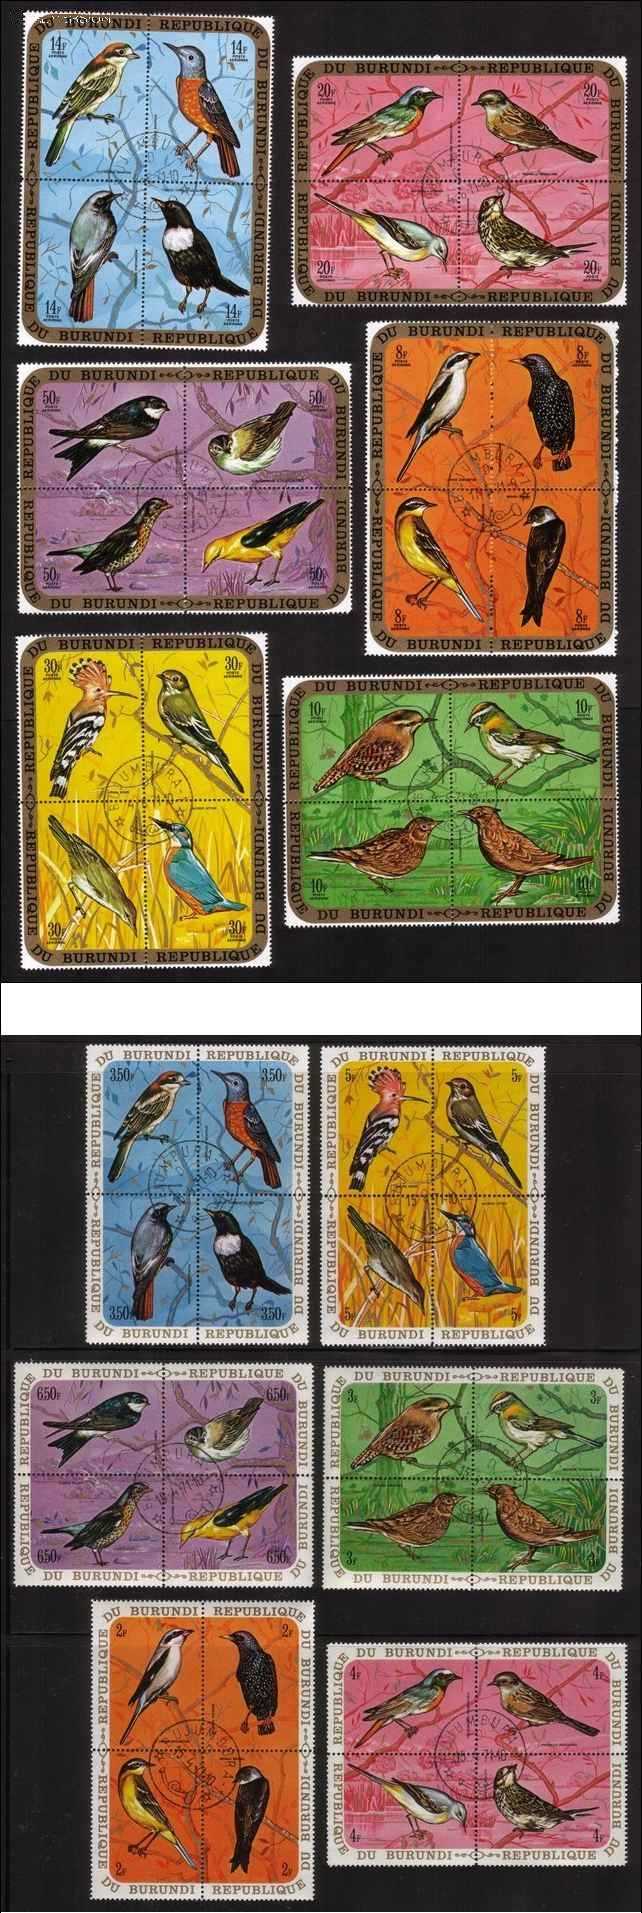 Birds: Northern Shrike, Great Reed Warbler, Etc. - Complete Set of 48 Different Incl. Airmails